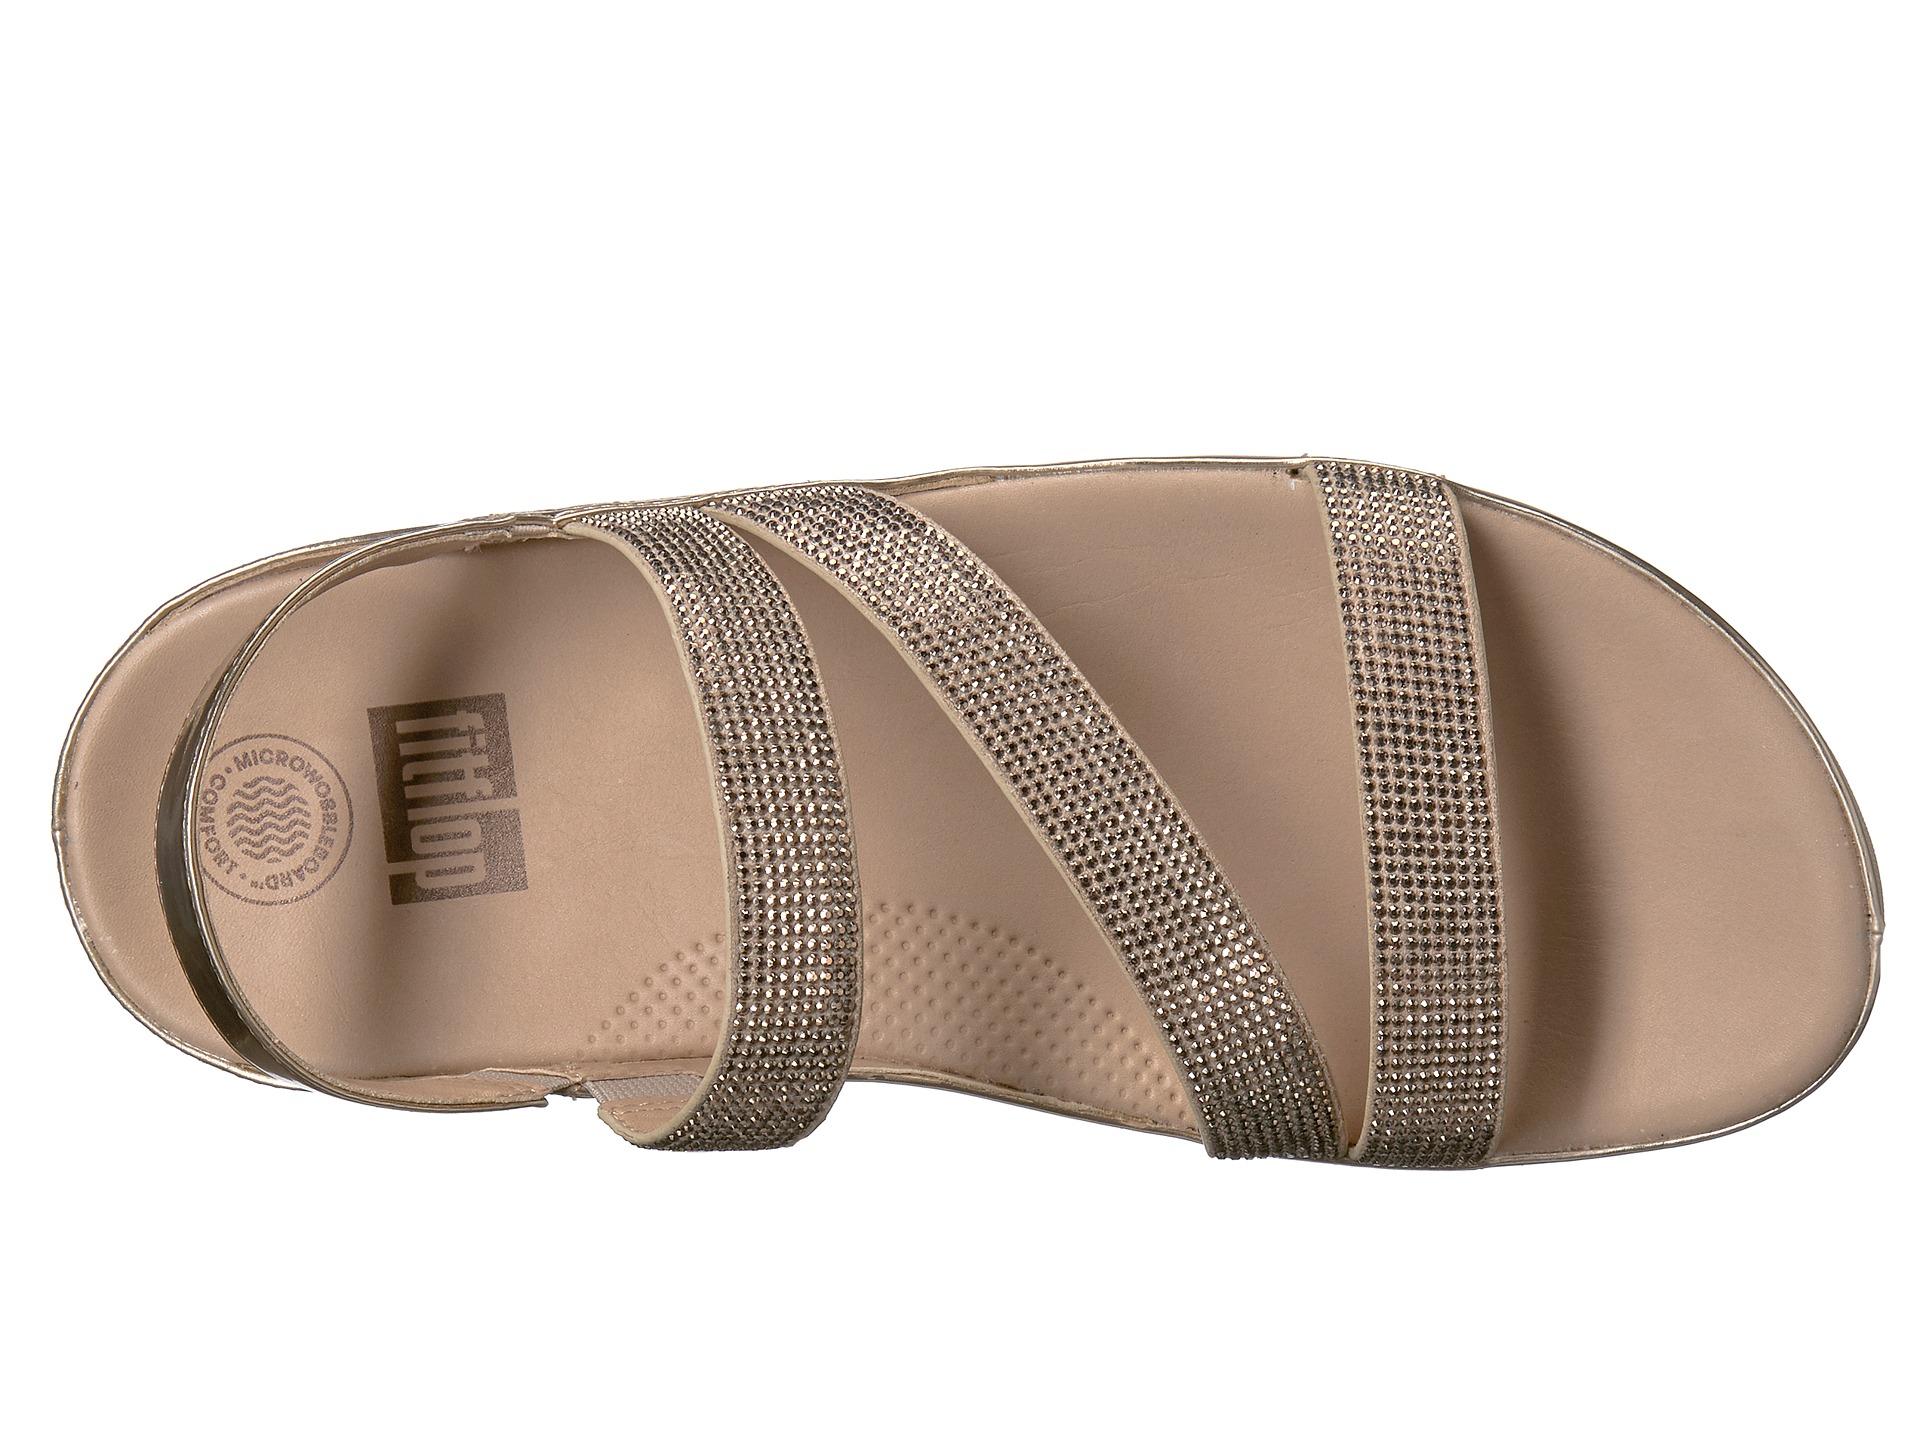 Lyst - Fitflop Crystall Z-strap Sandal